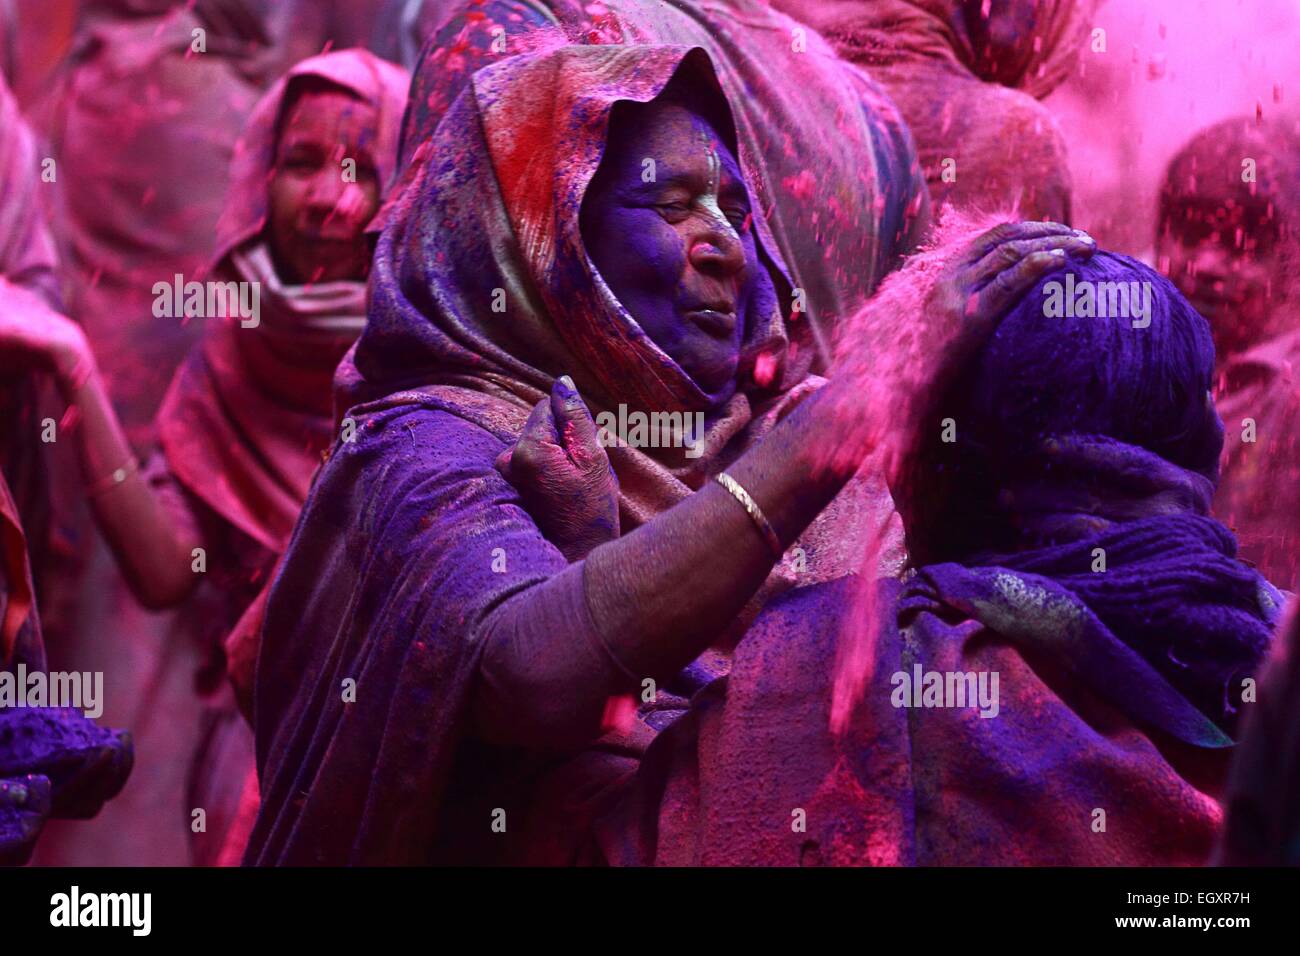 Ashram, Vrindavan, India. 03rd Mar, 2015. Indian widow plays Holi together on Tuesday at century old 'Pagal Baba Ashram' in Vrindavan, India. The widows who normally wear only white sarees, smeared colors on each other and enjoyed the festival with over 1,000 kg 'Gulal' and 1500 kgs of roses and marigold petals which has been arranged for the program. © Shashi Sharma/Pacific Press/Alamy Live News Credit:  PACIFIC PRESS/Alamy Live News Stock Photo